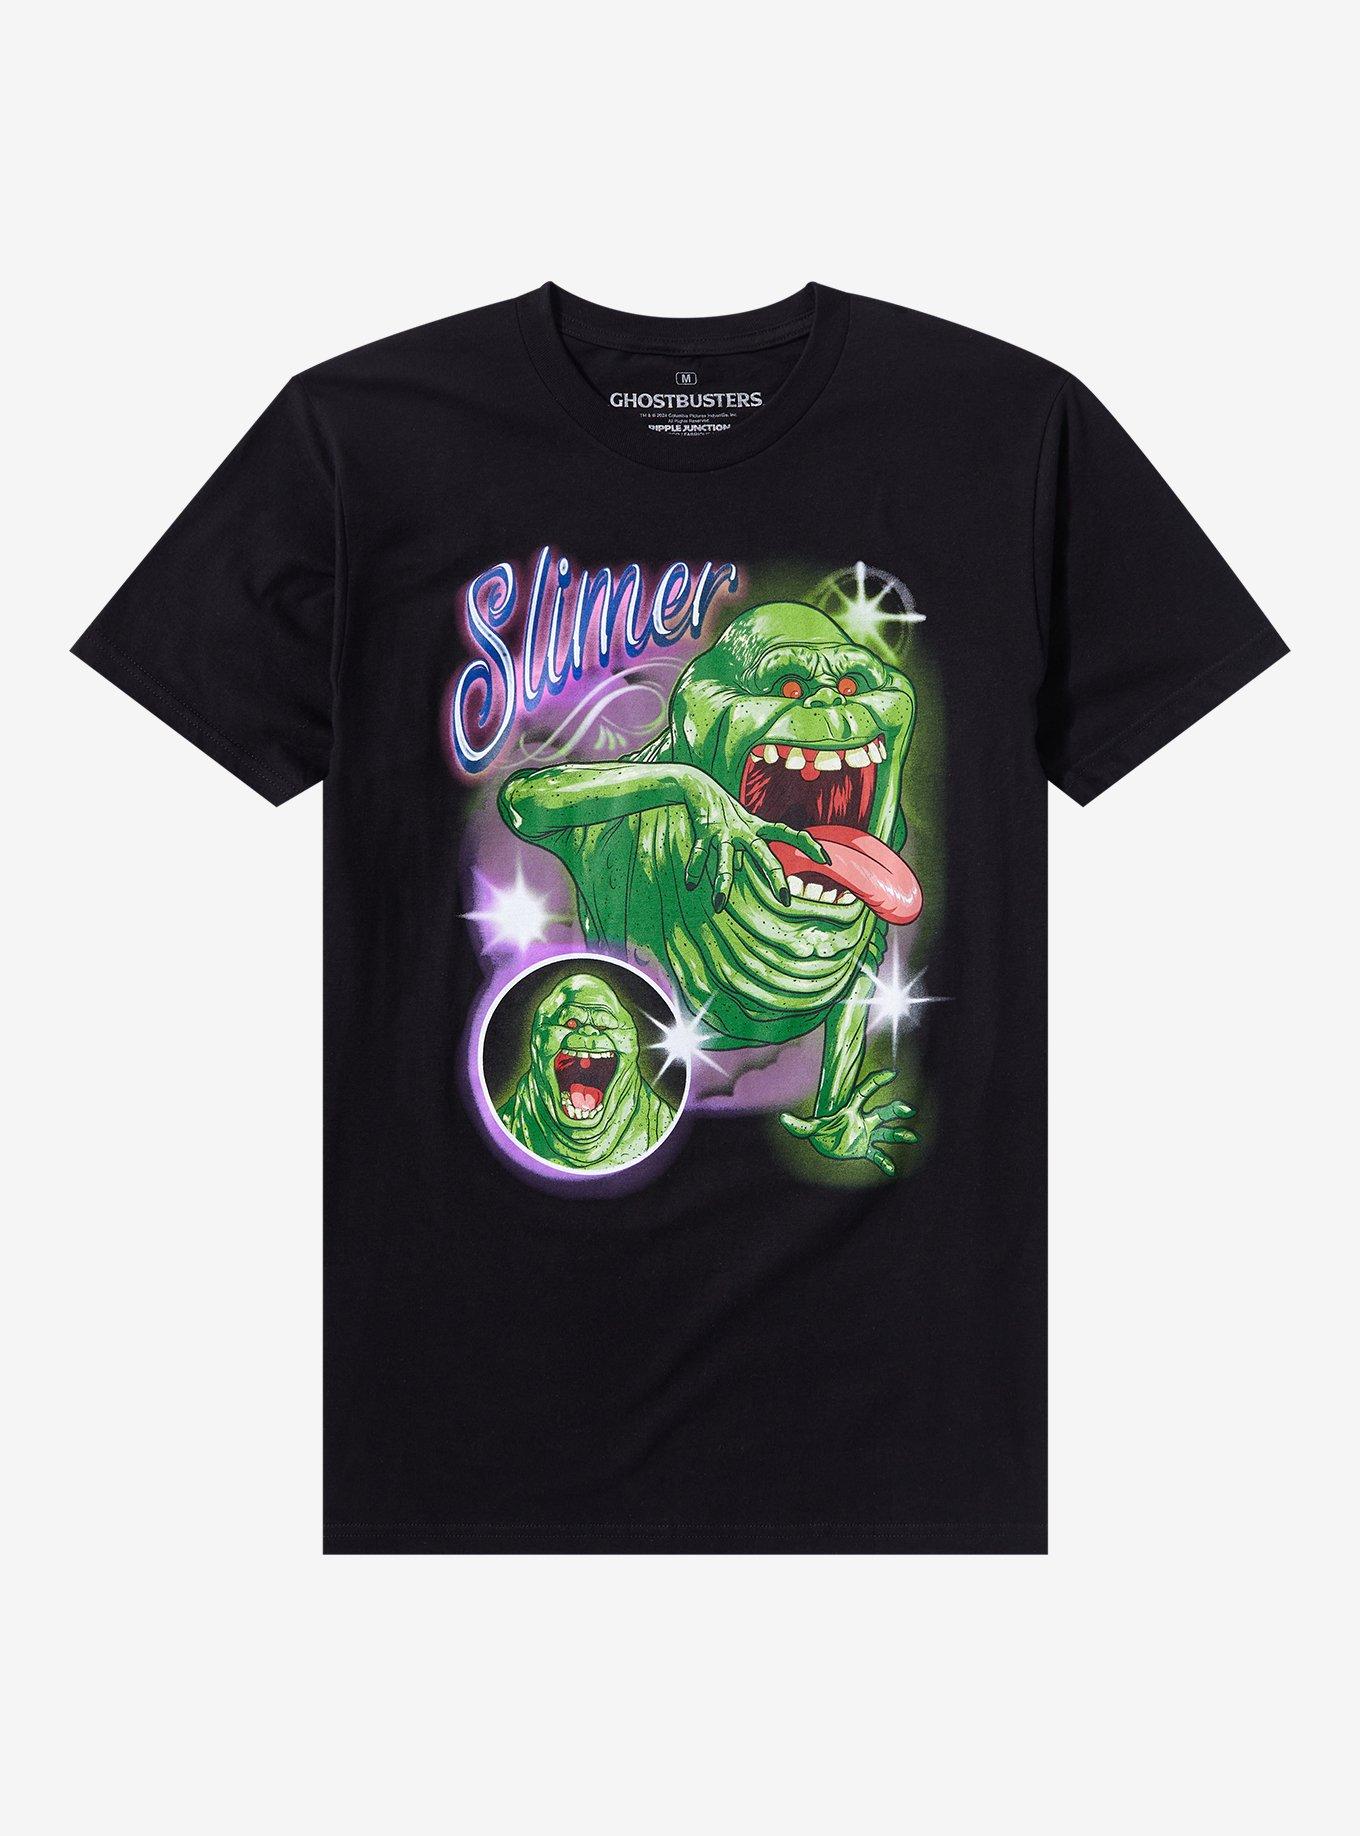 Ghostbusters Slimer Airbrush-Style T-Shirt, BLACK, hi-res